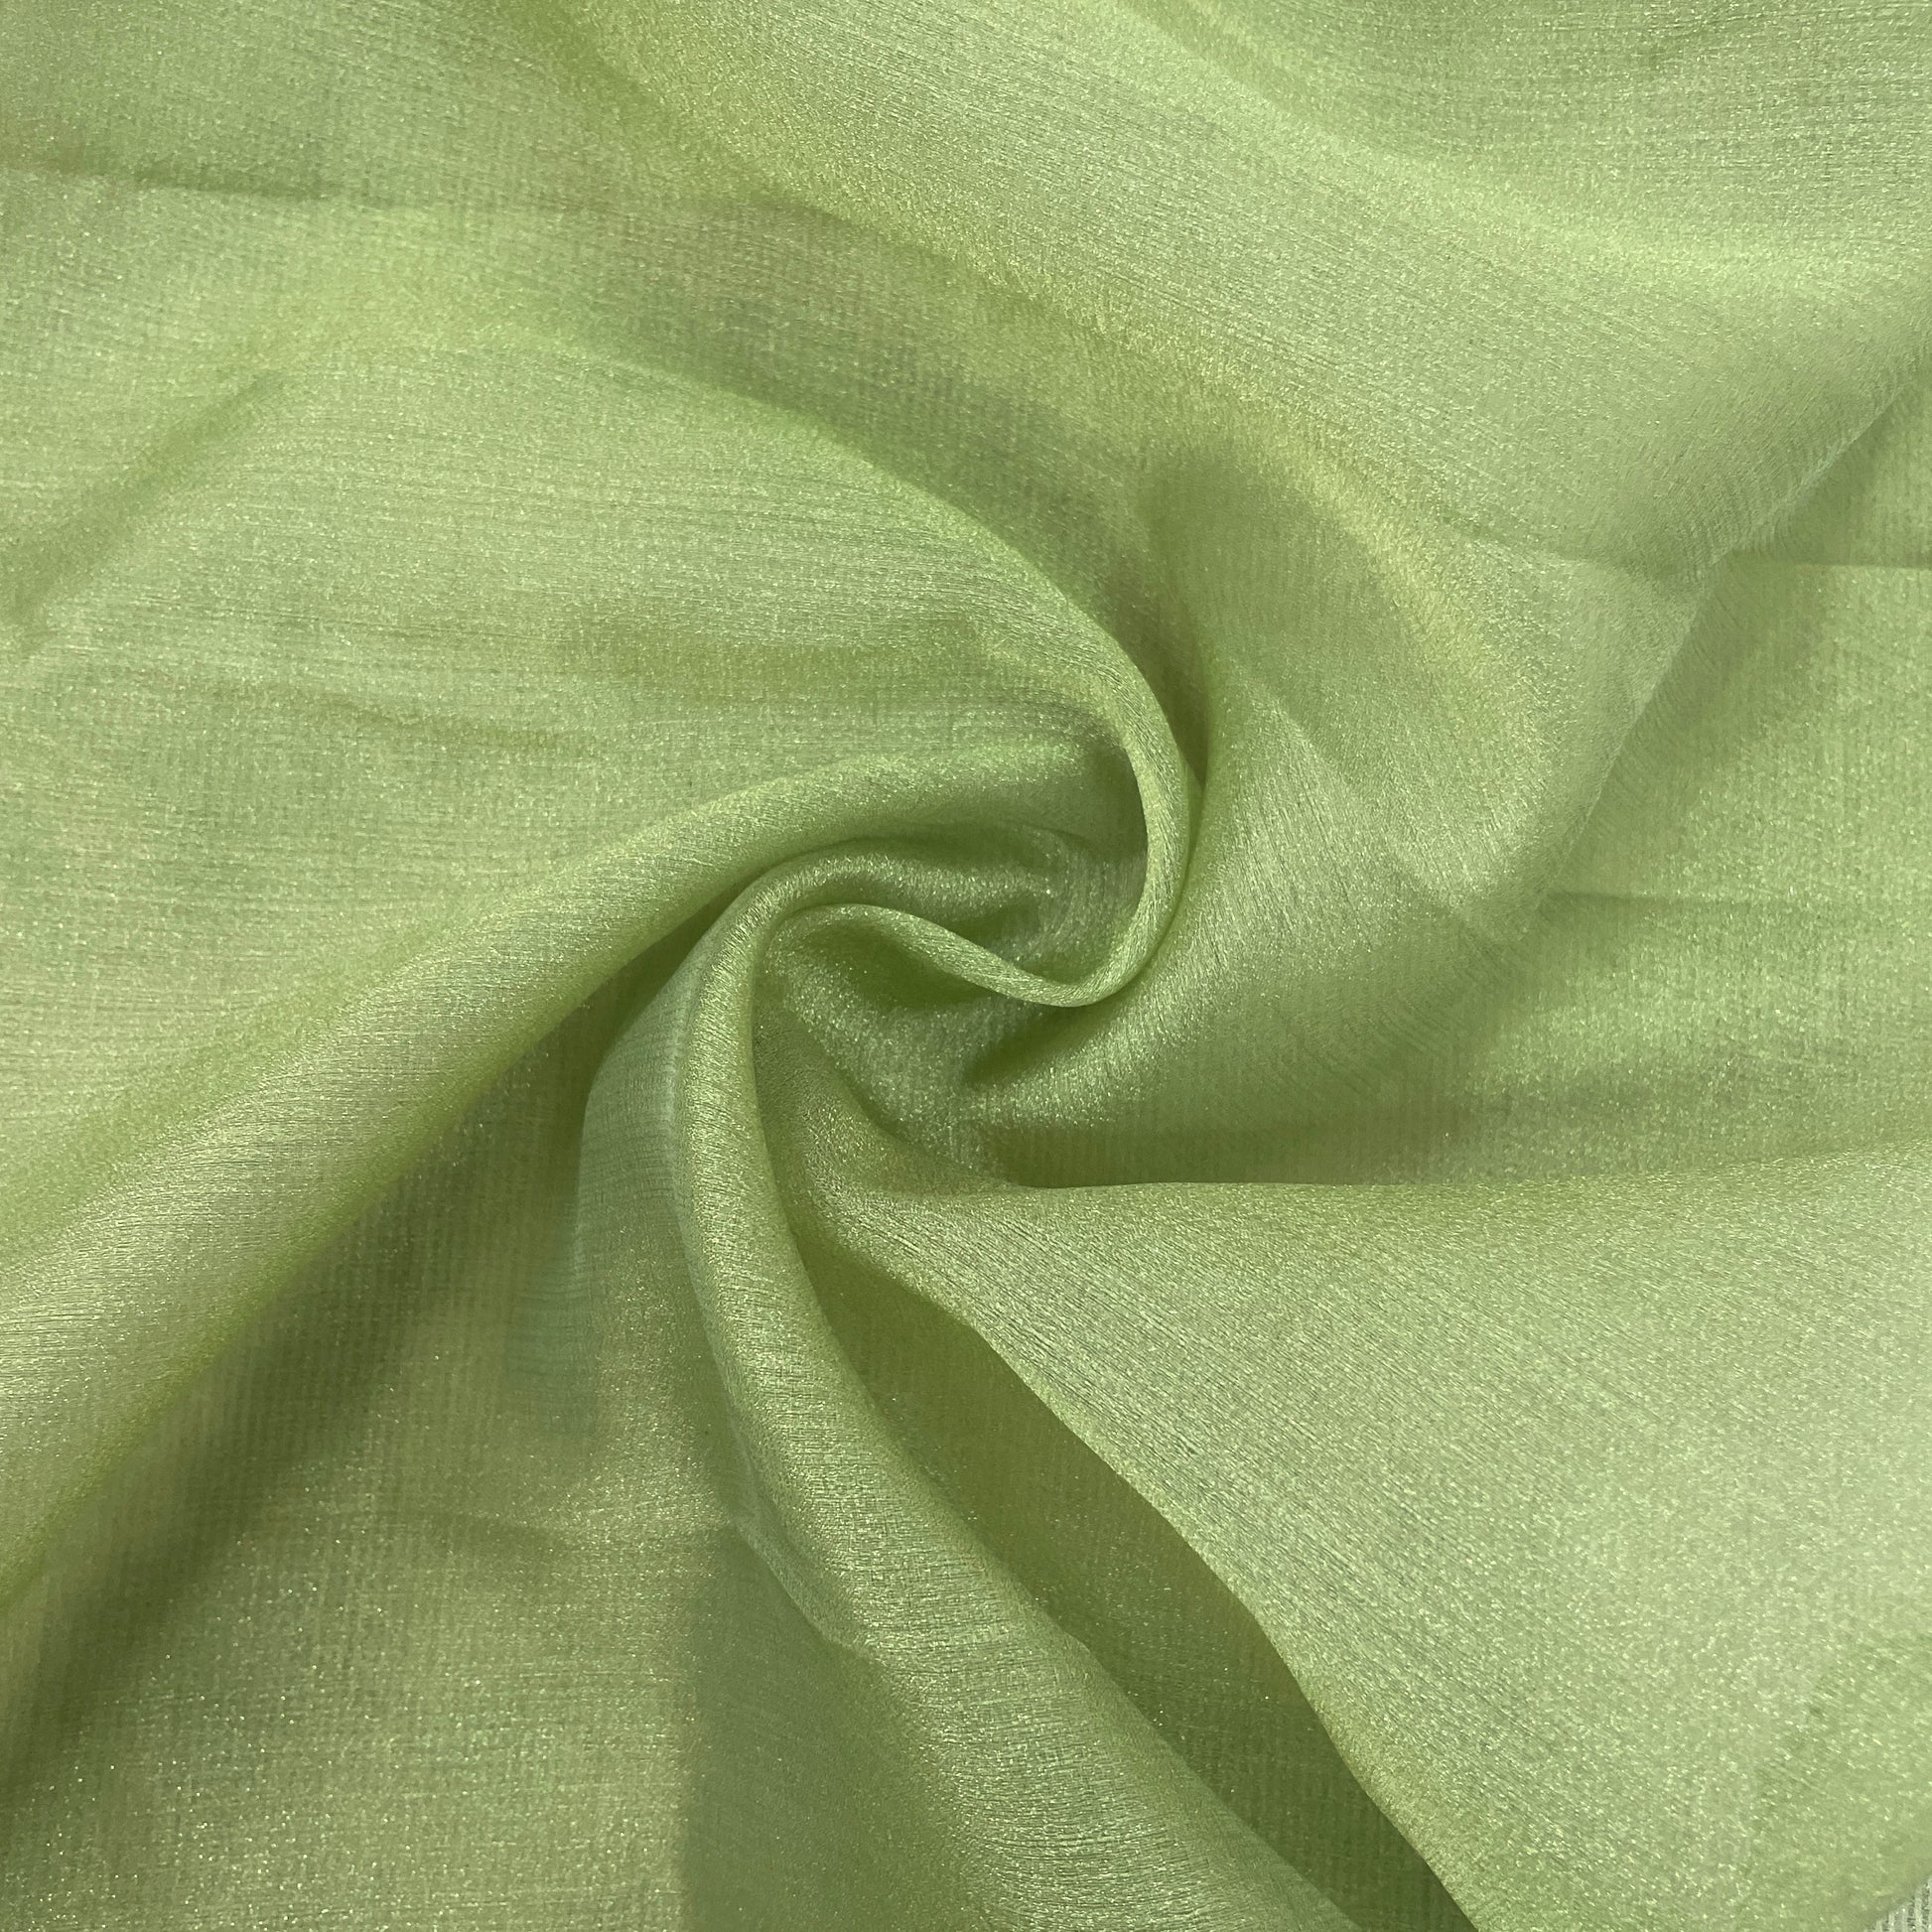 Olive Green Solid Tissue Fabric - TradeUNO